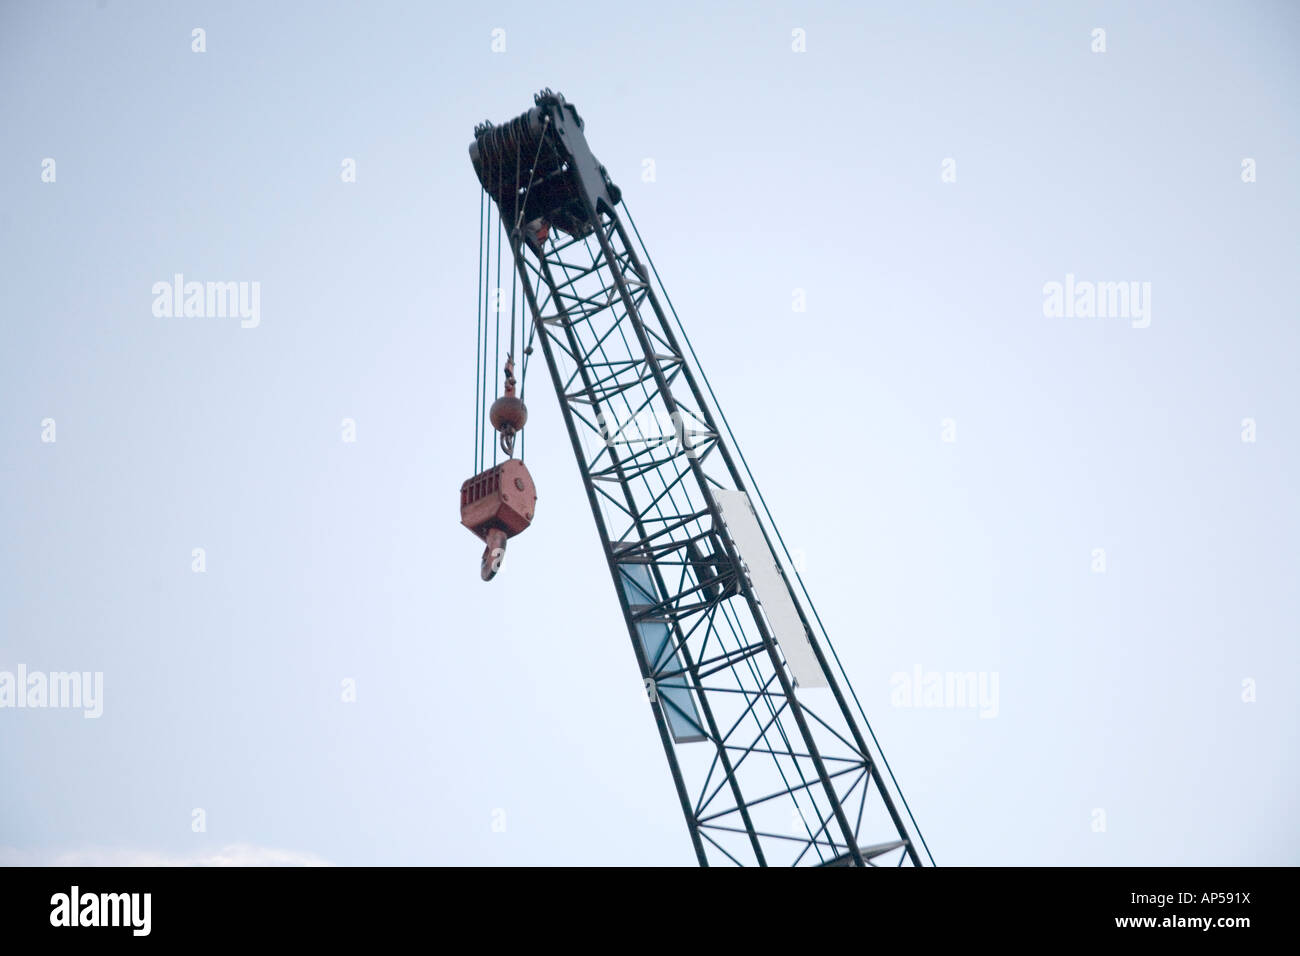 Crane on a construction site in Florida Stock Photo